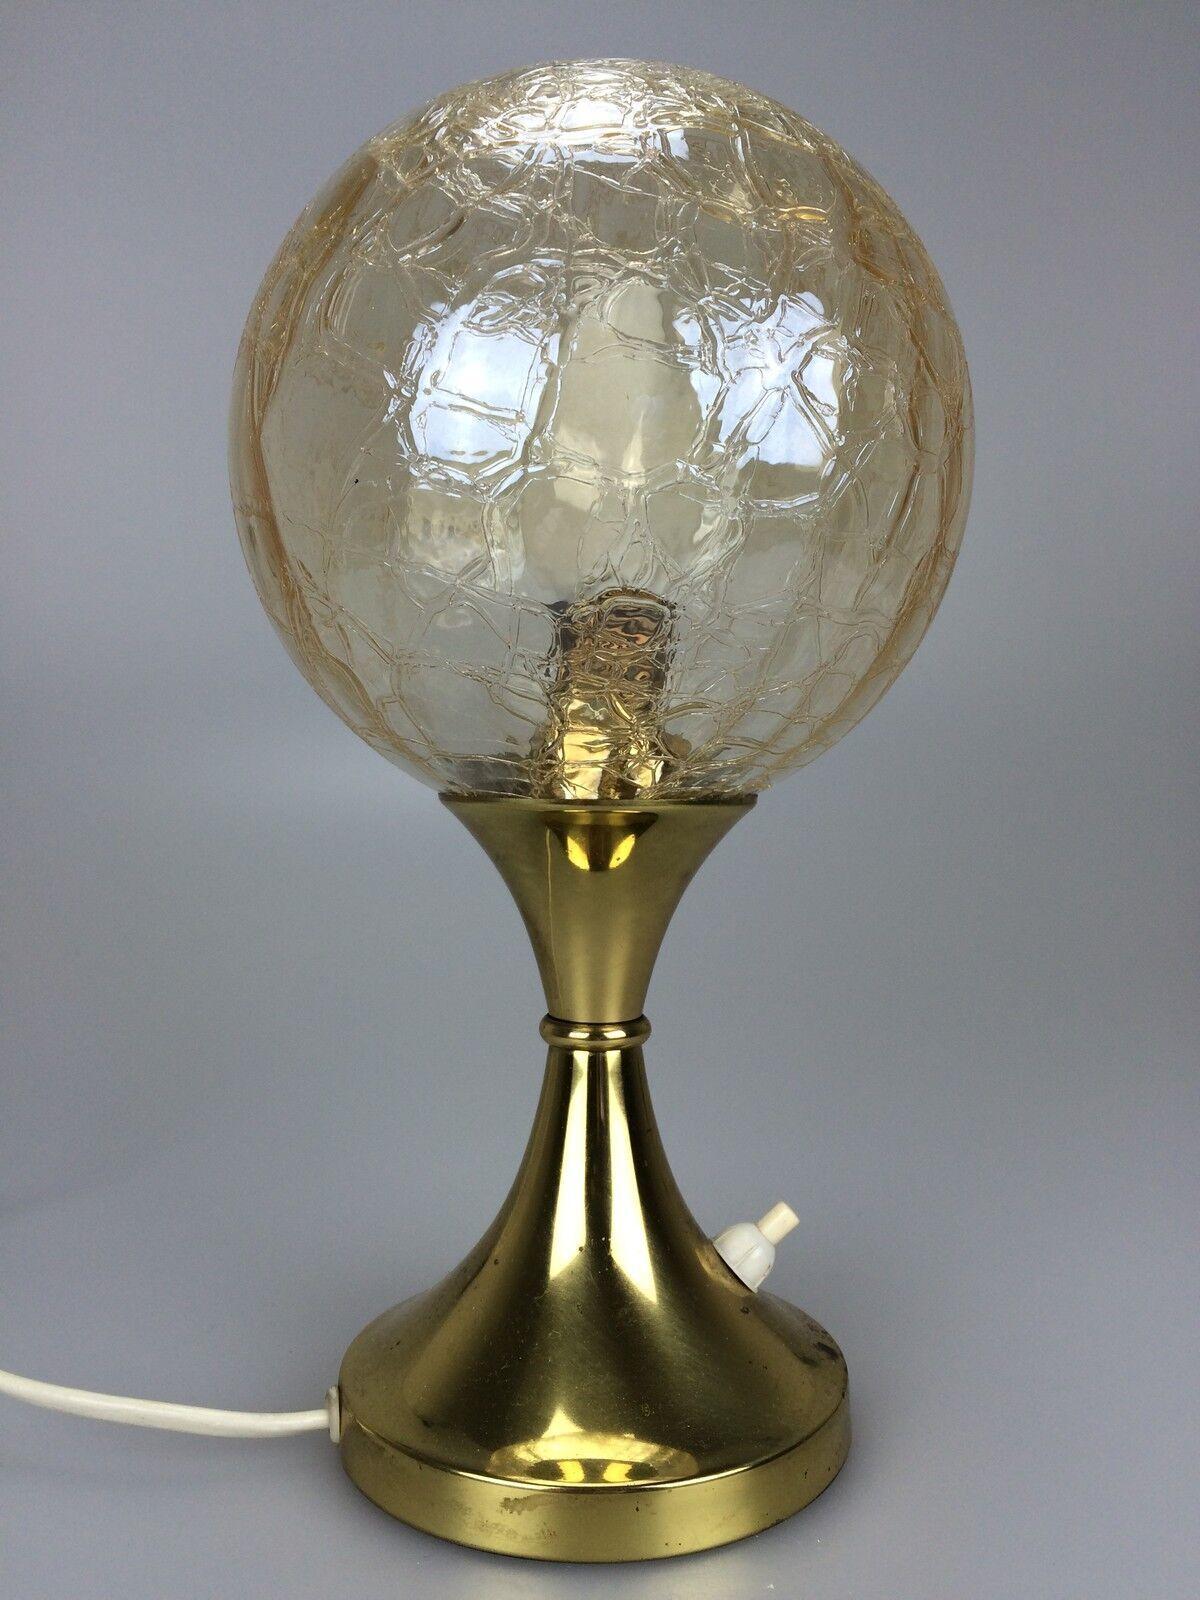 60s 70s ball lamp light table lamp bedside lamp space age design

Object: spherical lamp

Manufacturer:

Condition: good

Age: around 1960-1970

Dimensions:

Diameter = 15cm
Height = 29cm

Other notes:

The pictures serve as part of